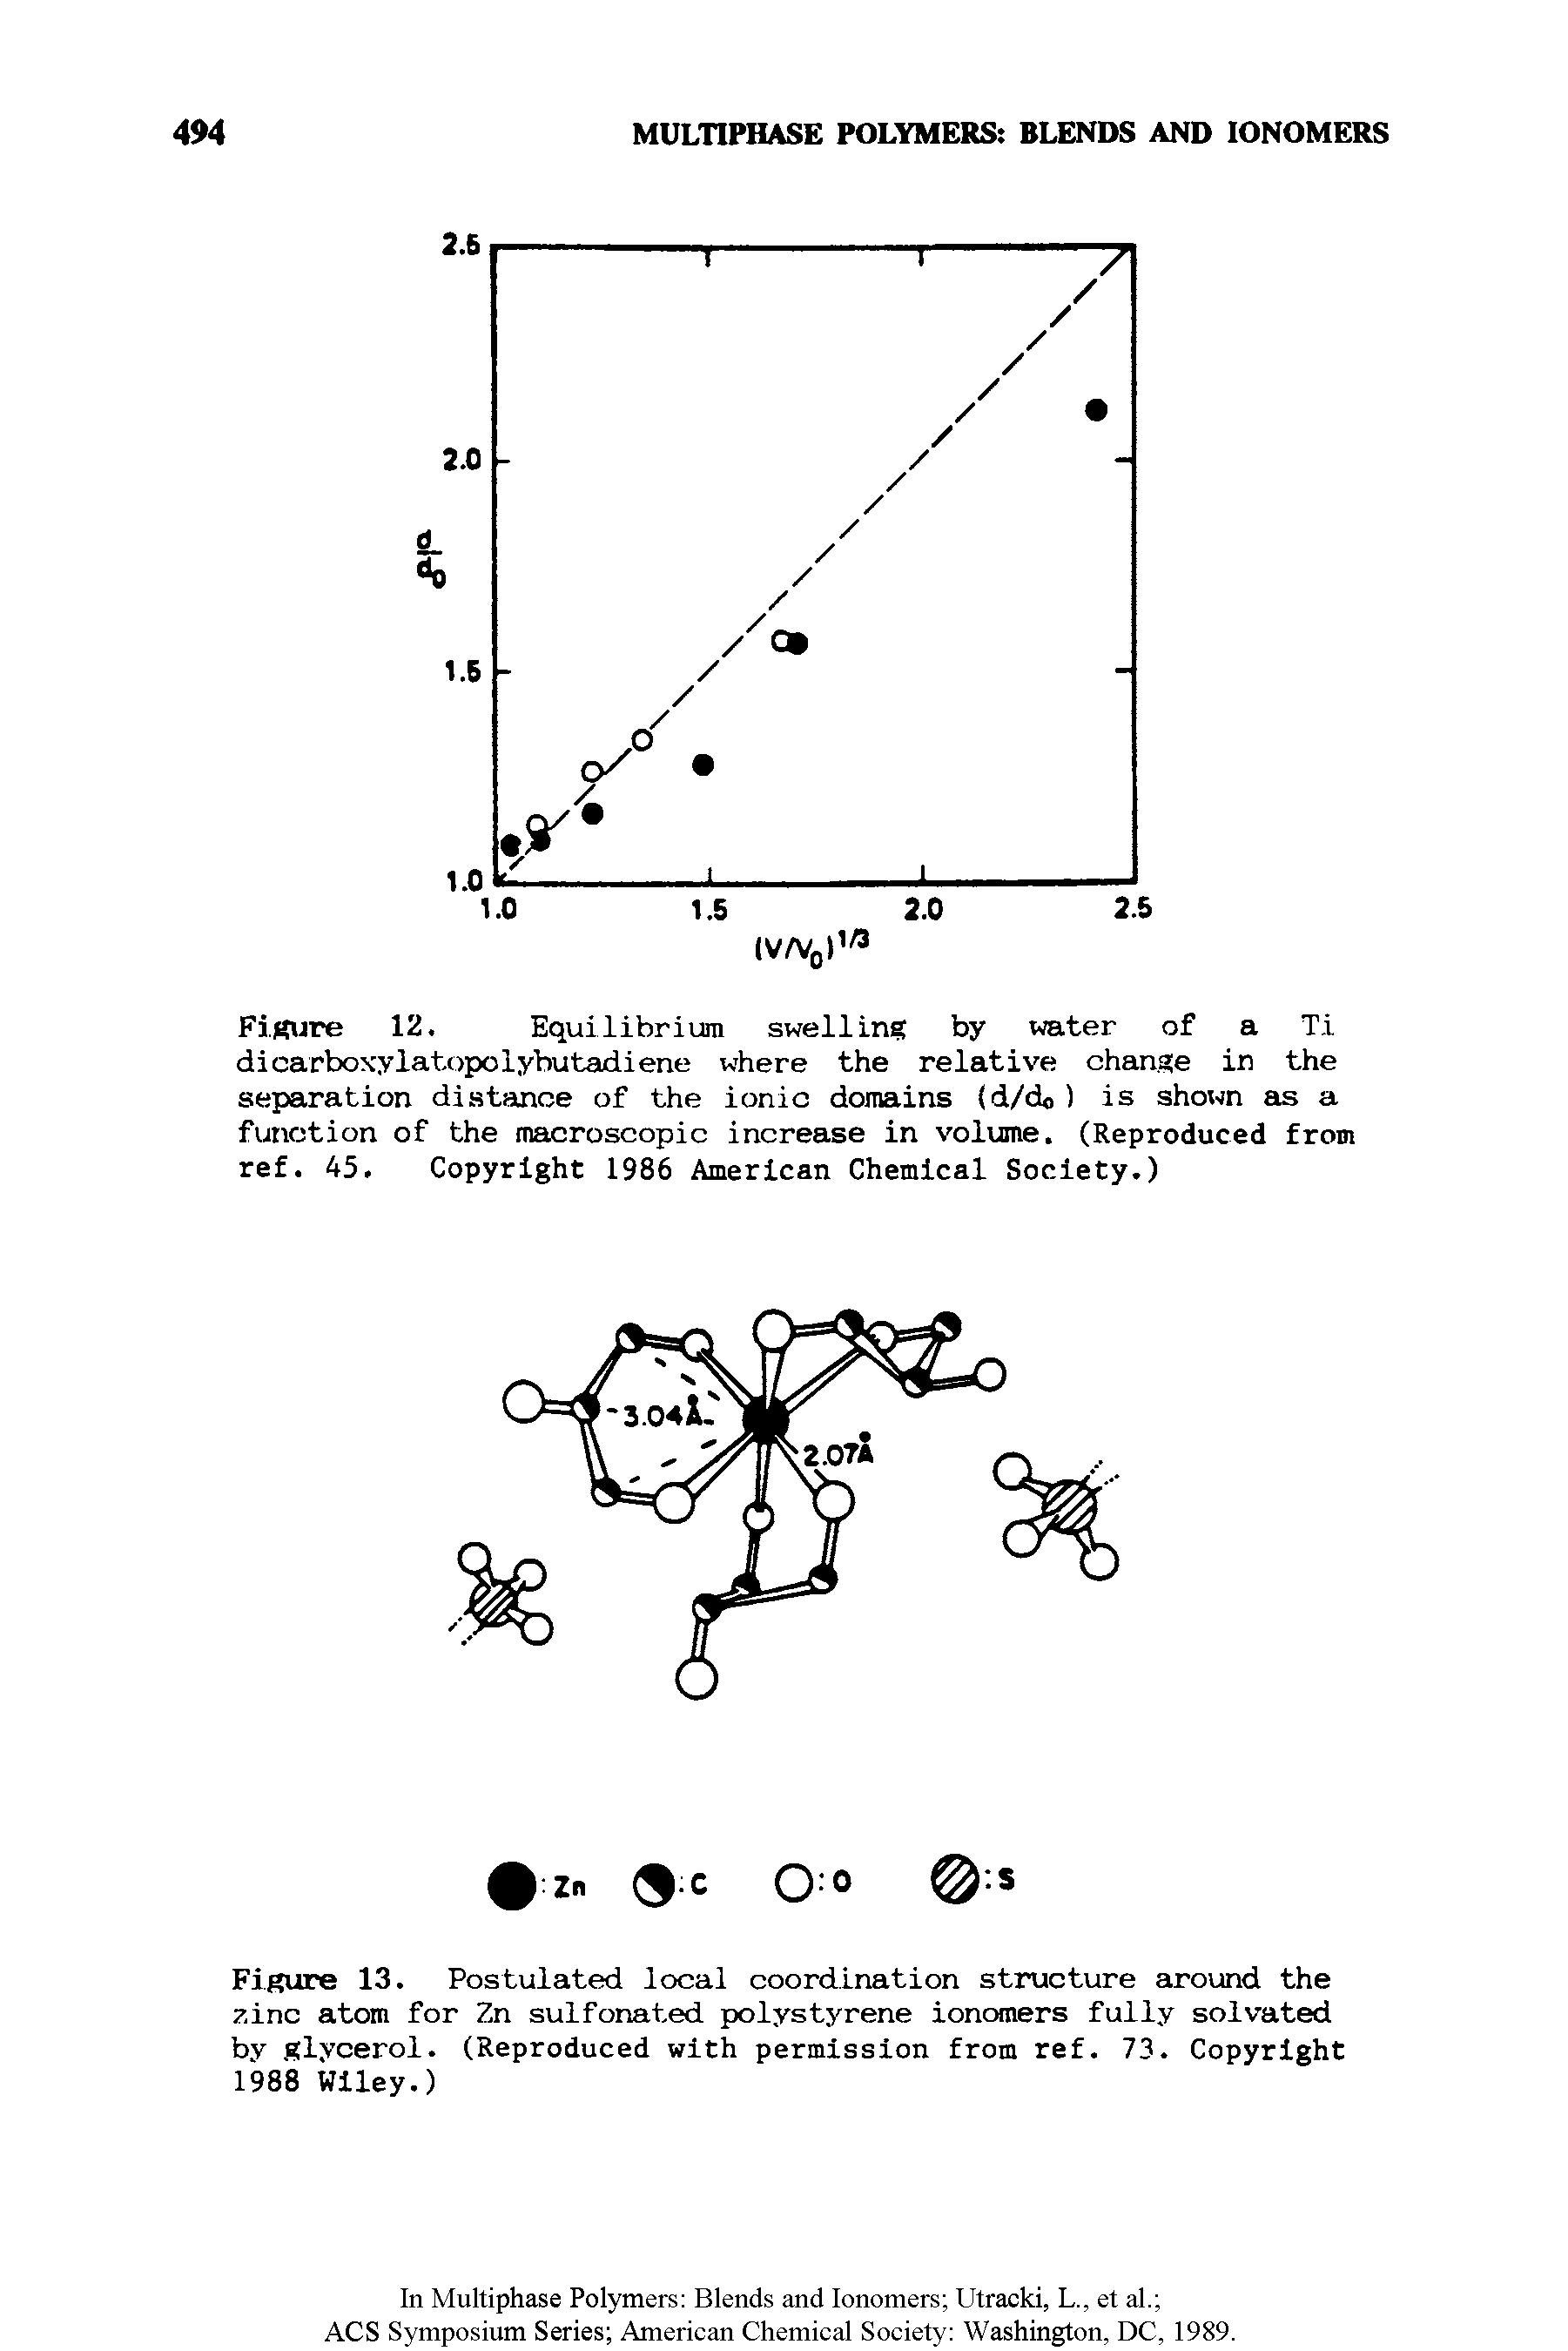 Figure 13. Postulated local coordination structure around the zinc atom for Zn sulfonated polystyrene ionomers fully solvated by glycerol. (Reproduced with permission from ref. 73. Copyright 1988 Wiley.)...